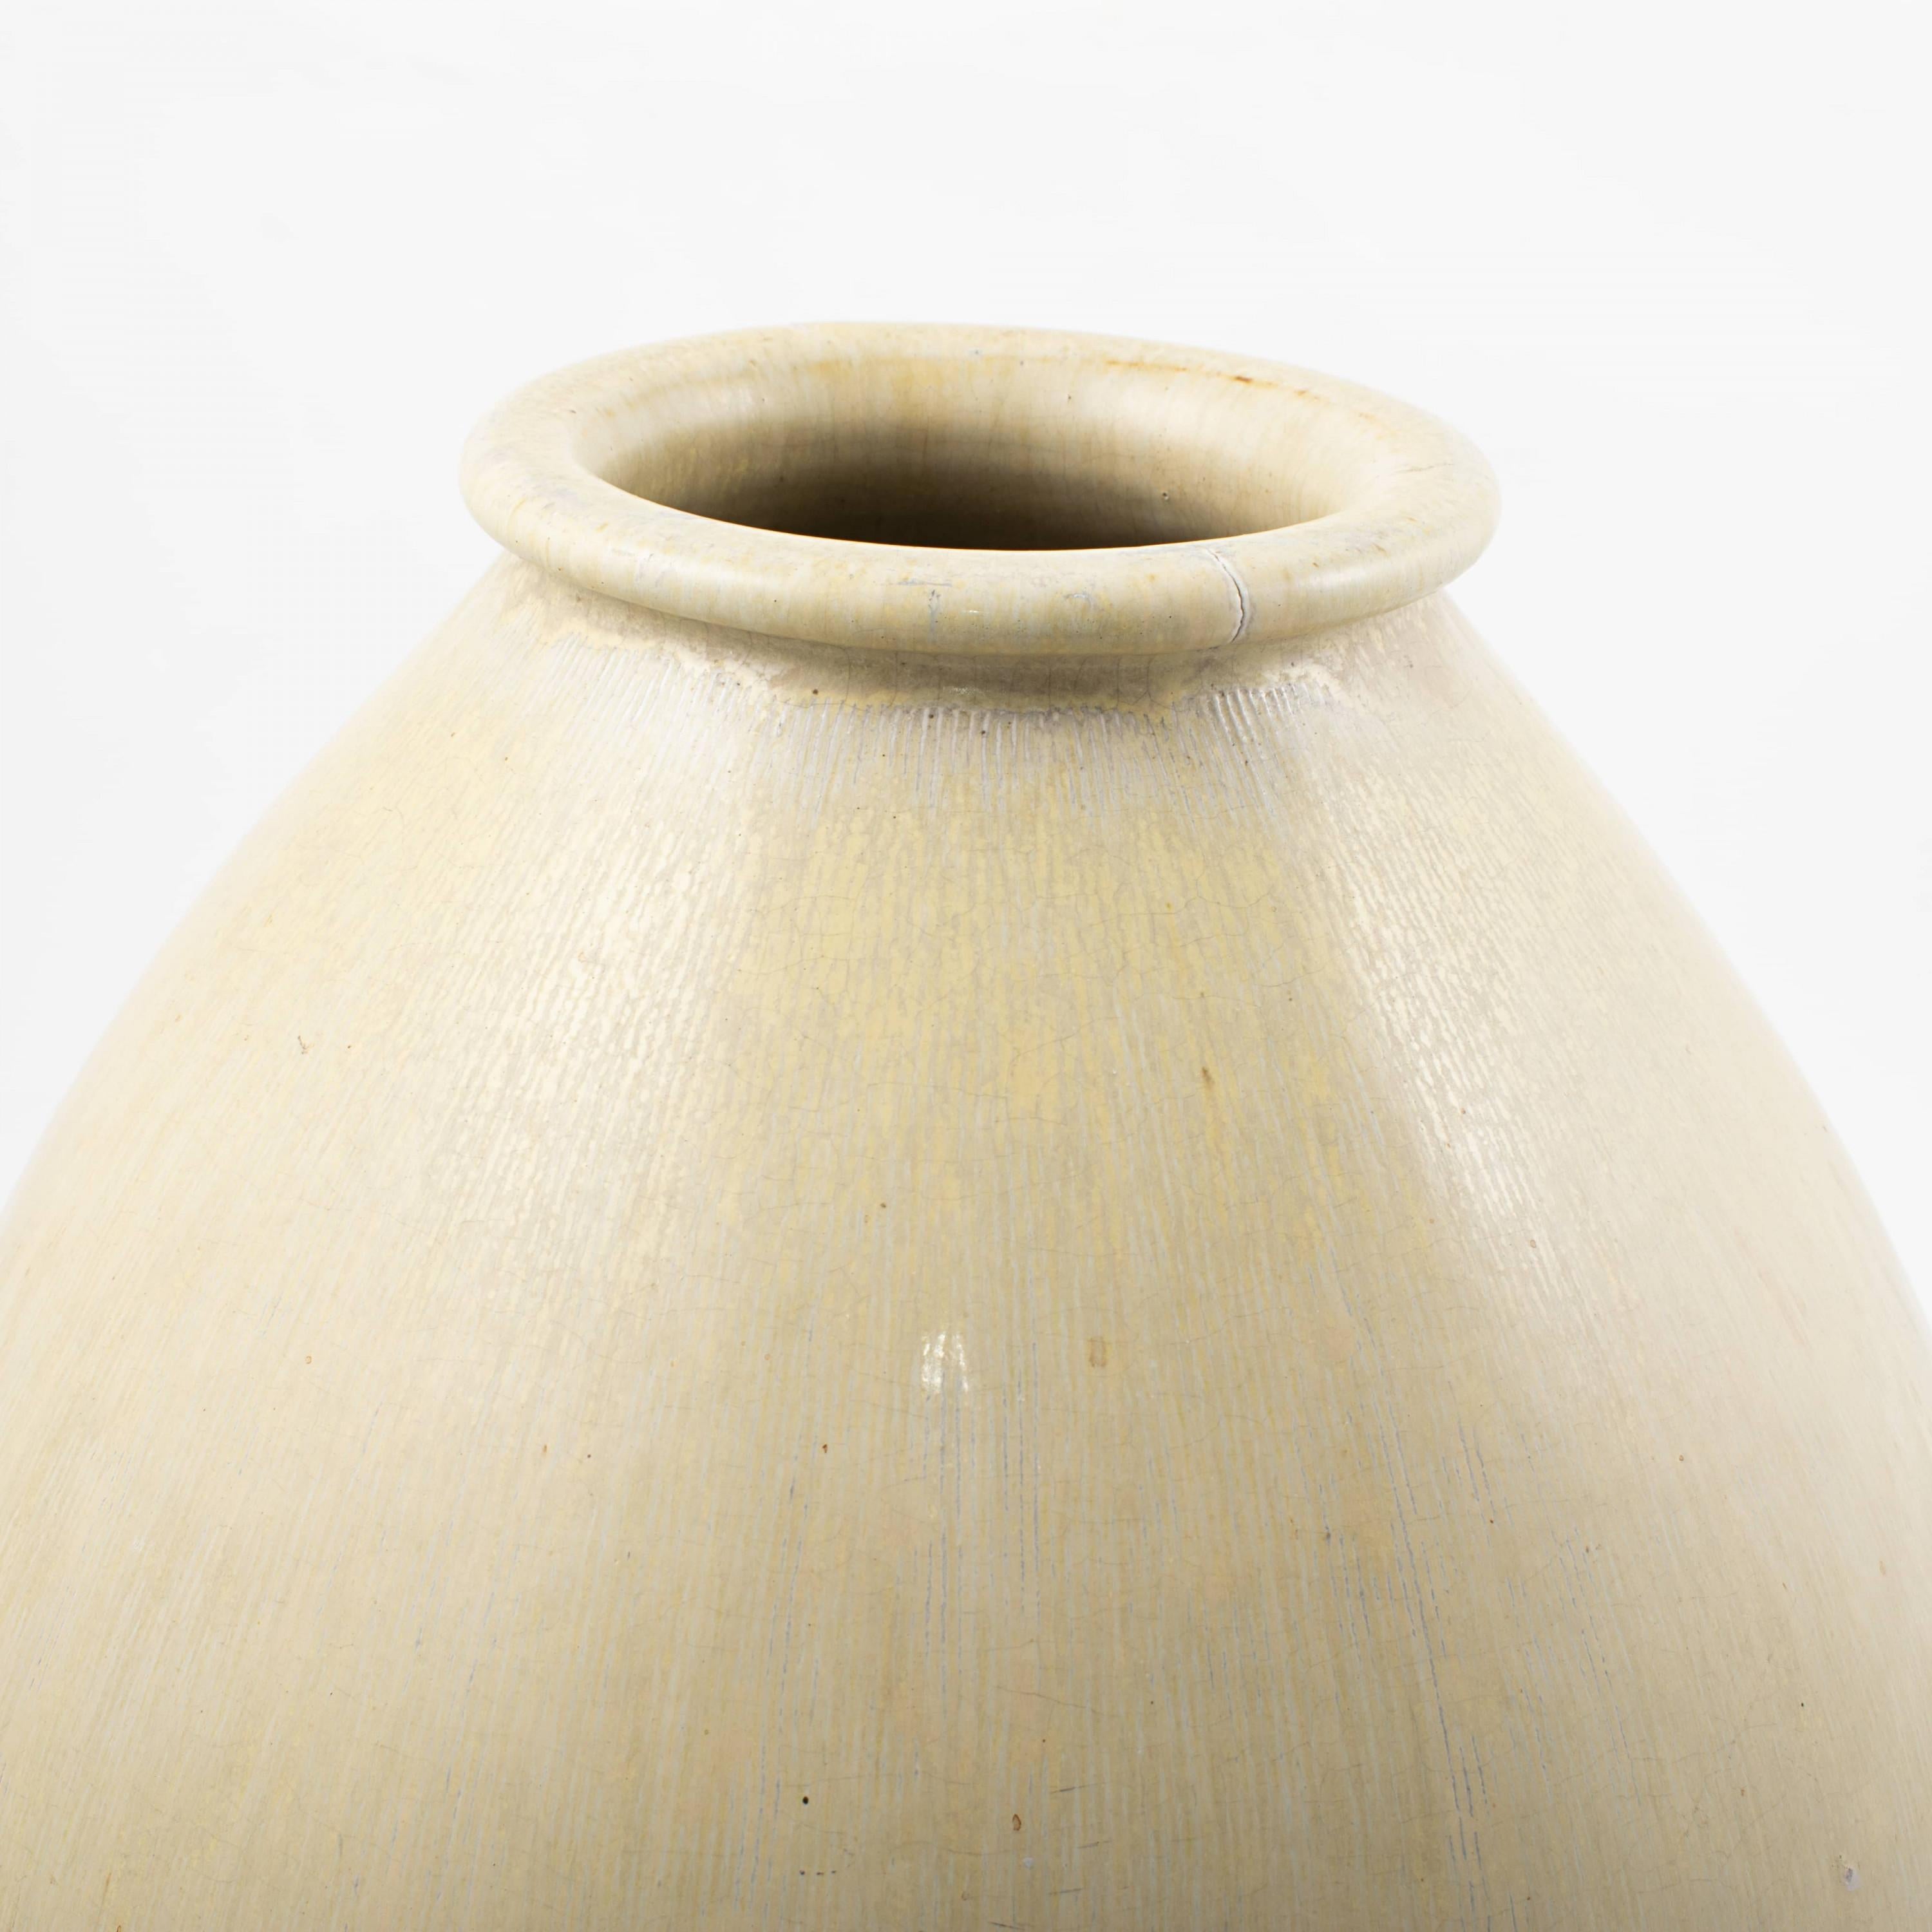 Rare large vase made at Saxbo in Denmark. One of a kind. Measure: H: 42 CM.
Stoneware decorated with light ochre glaze.
Designed by the Danish ceramist Natalia Krebs, c. 1950. With stamp.

In great condition but with two small natural cracks at